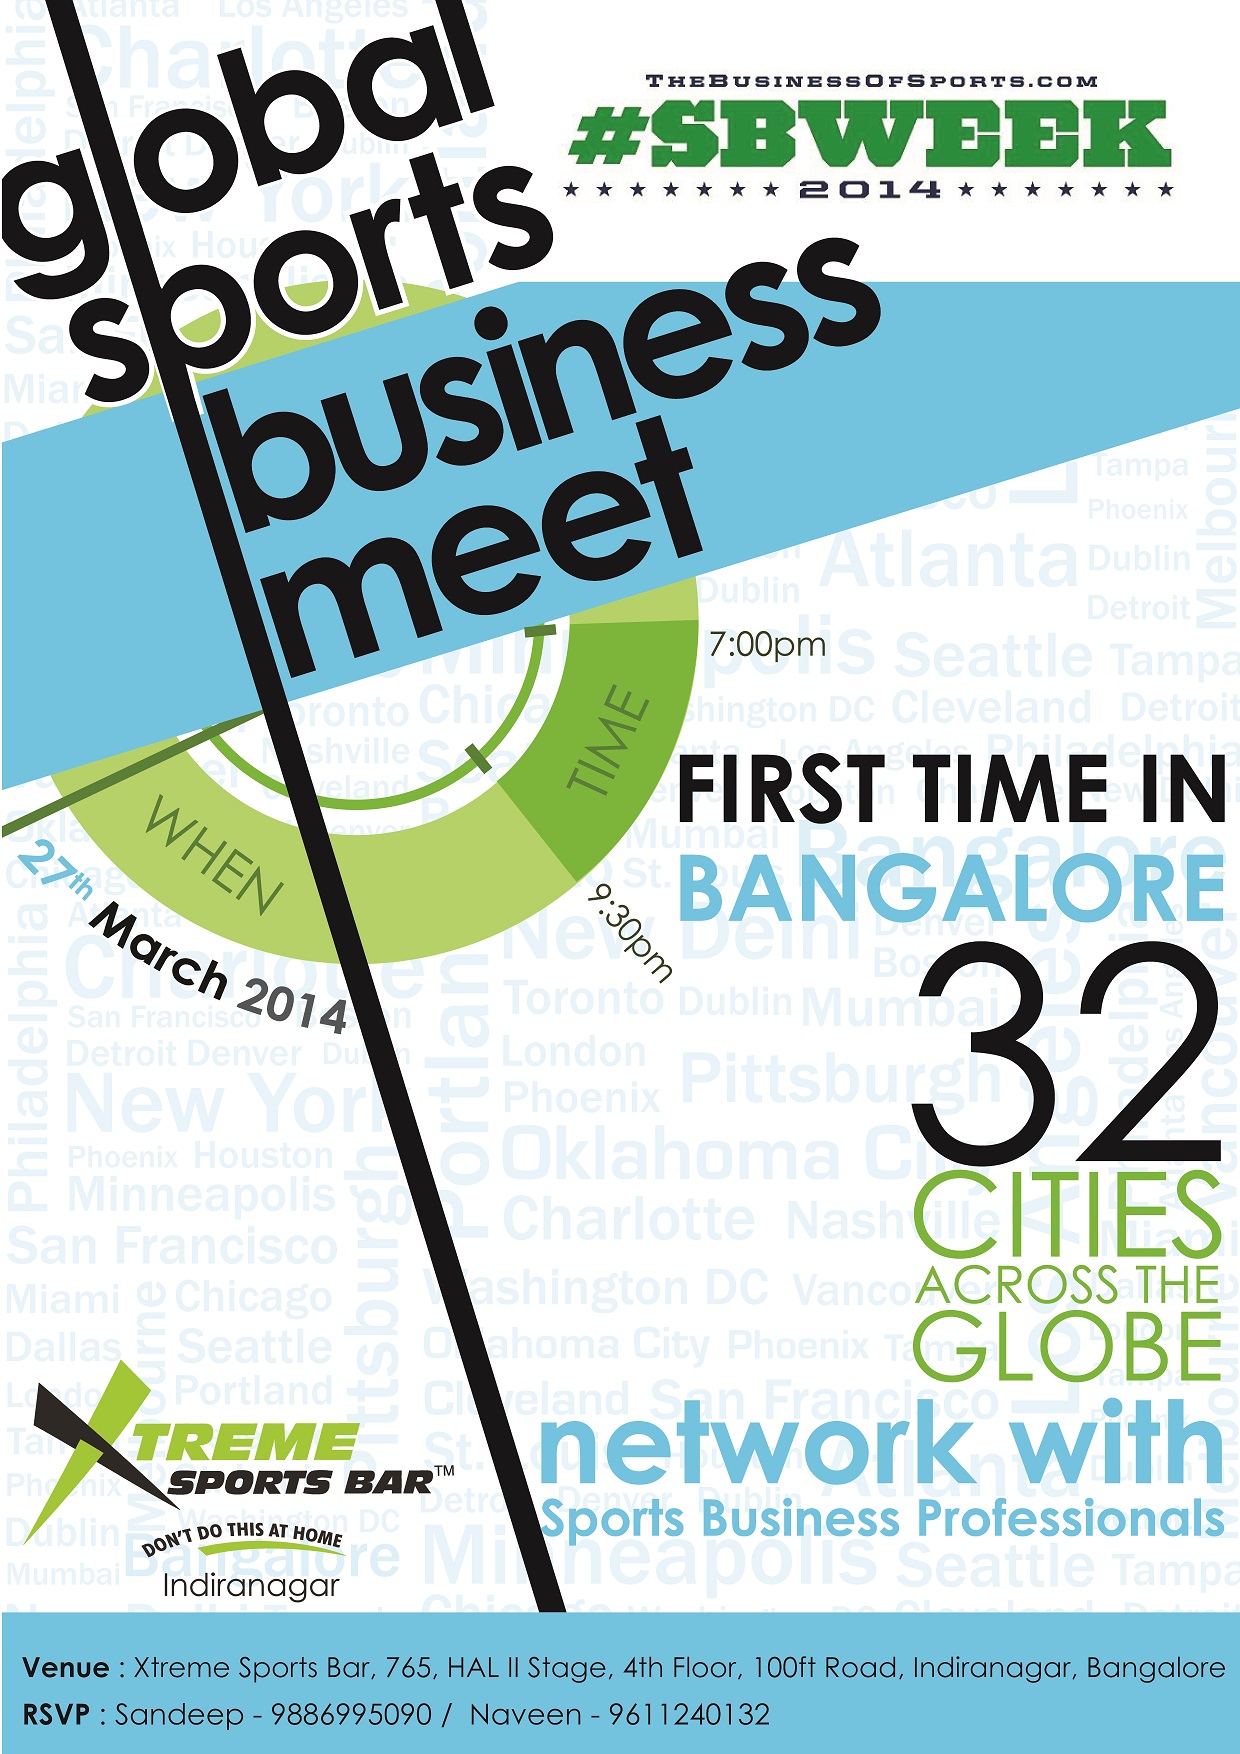 World's largest sports business networking event comes to India